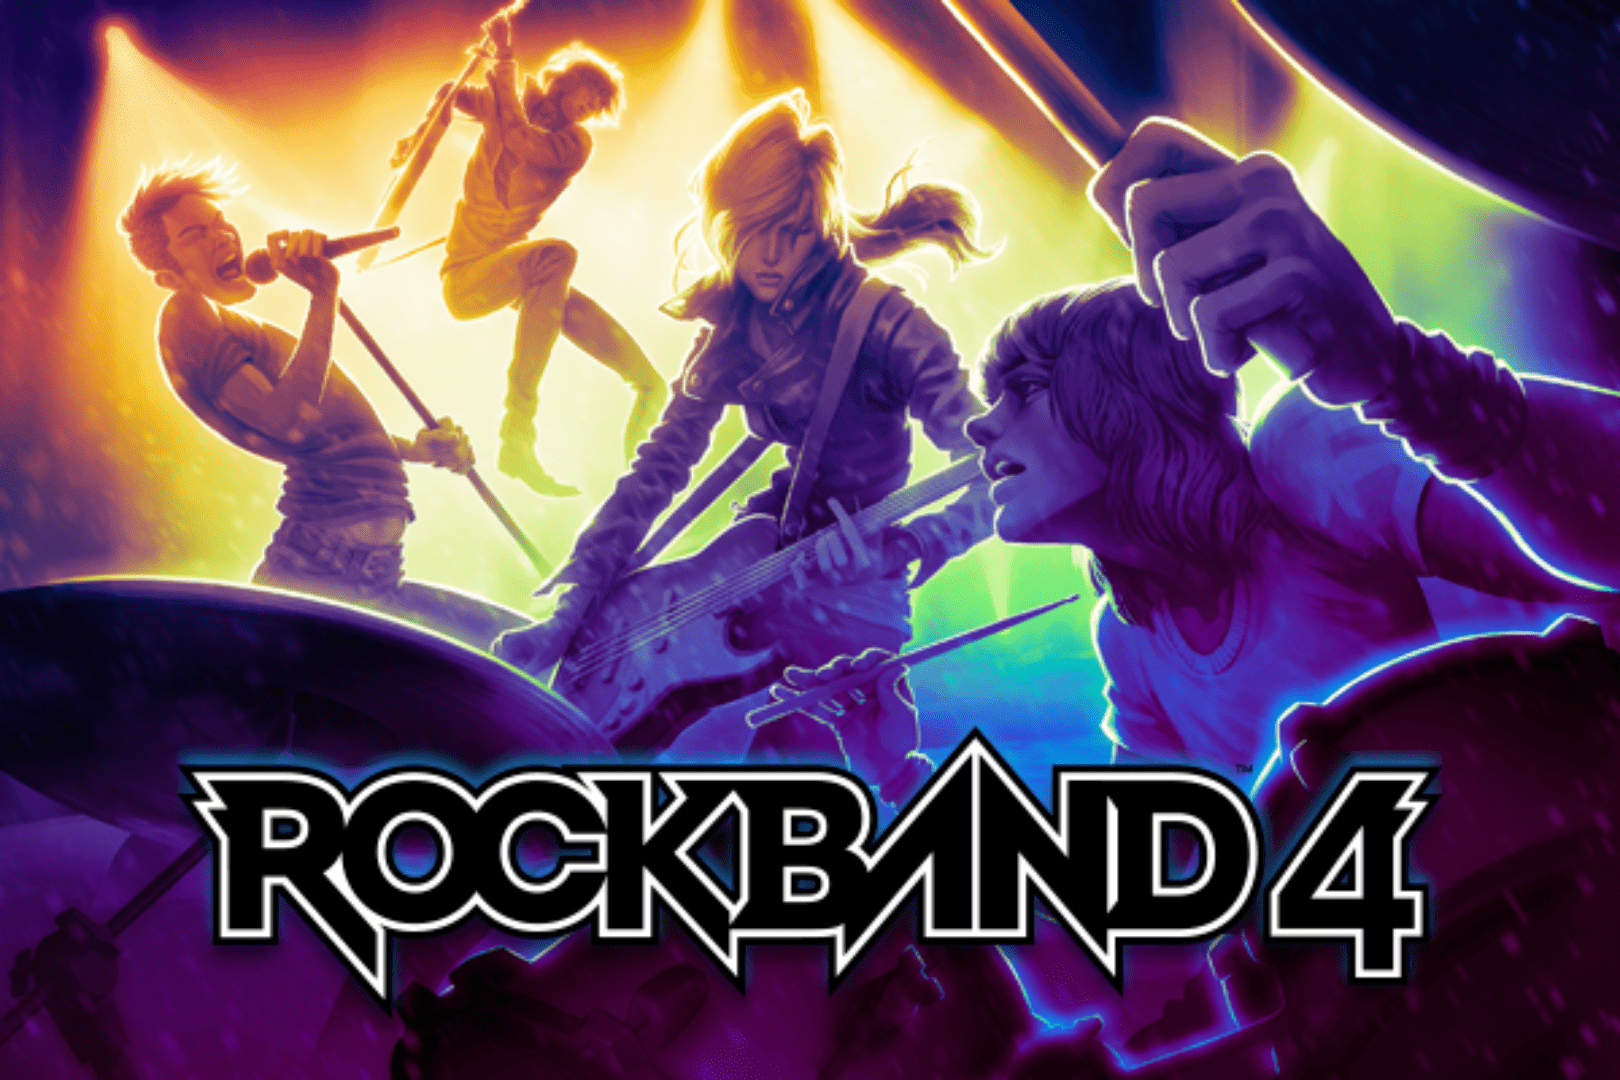 Rock Band 4 Announced Ahead of PAX East 2015